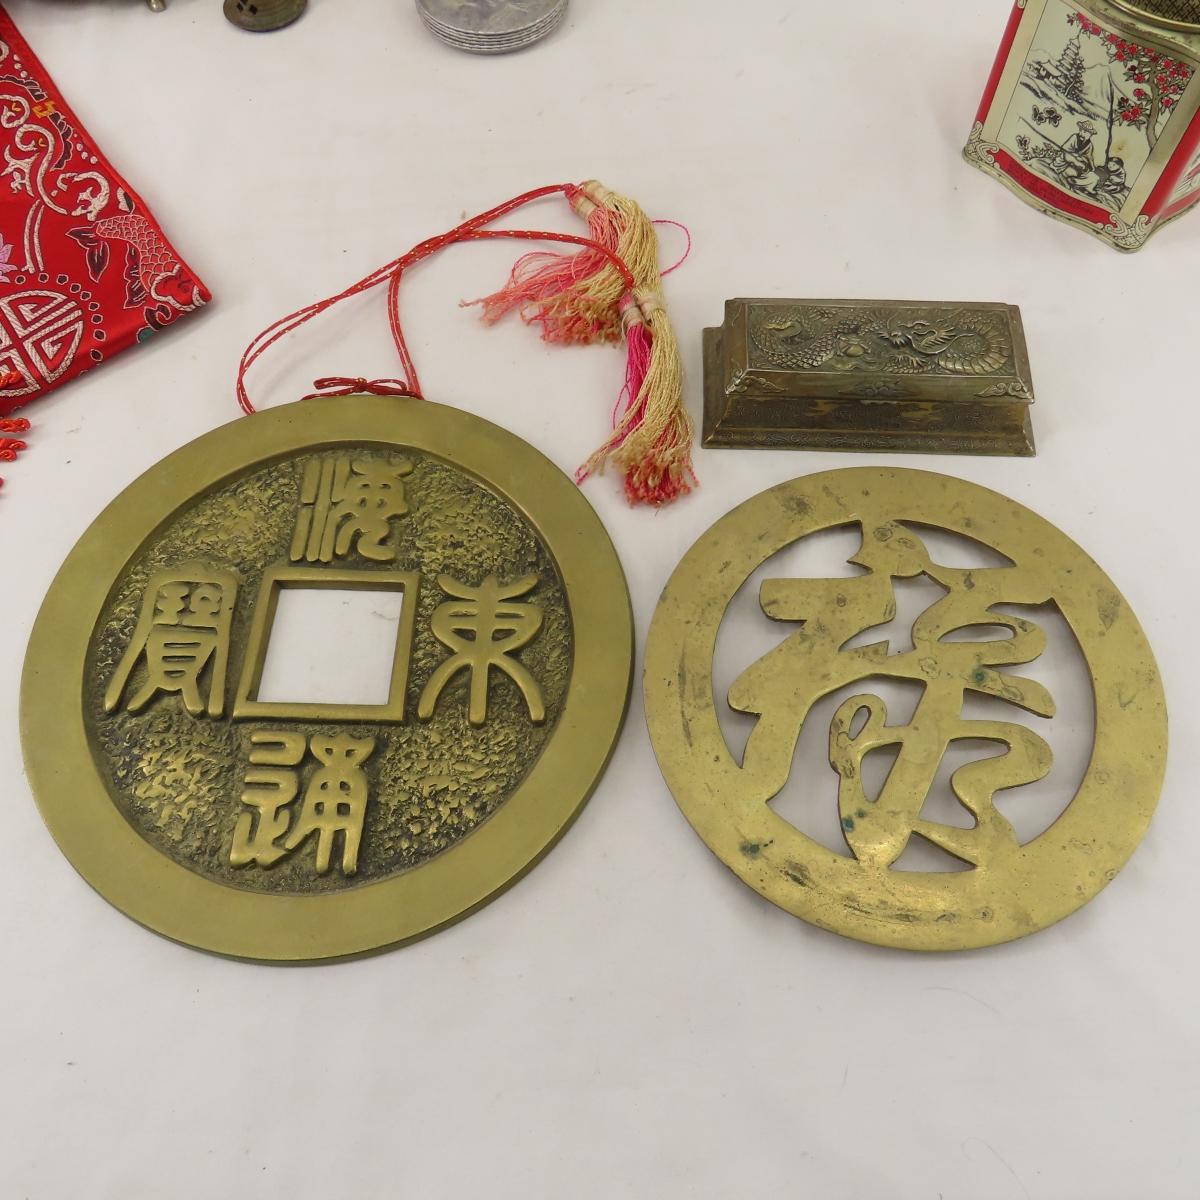 Chinese brass, books, tins and more